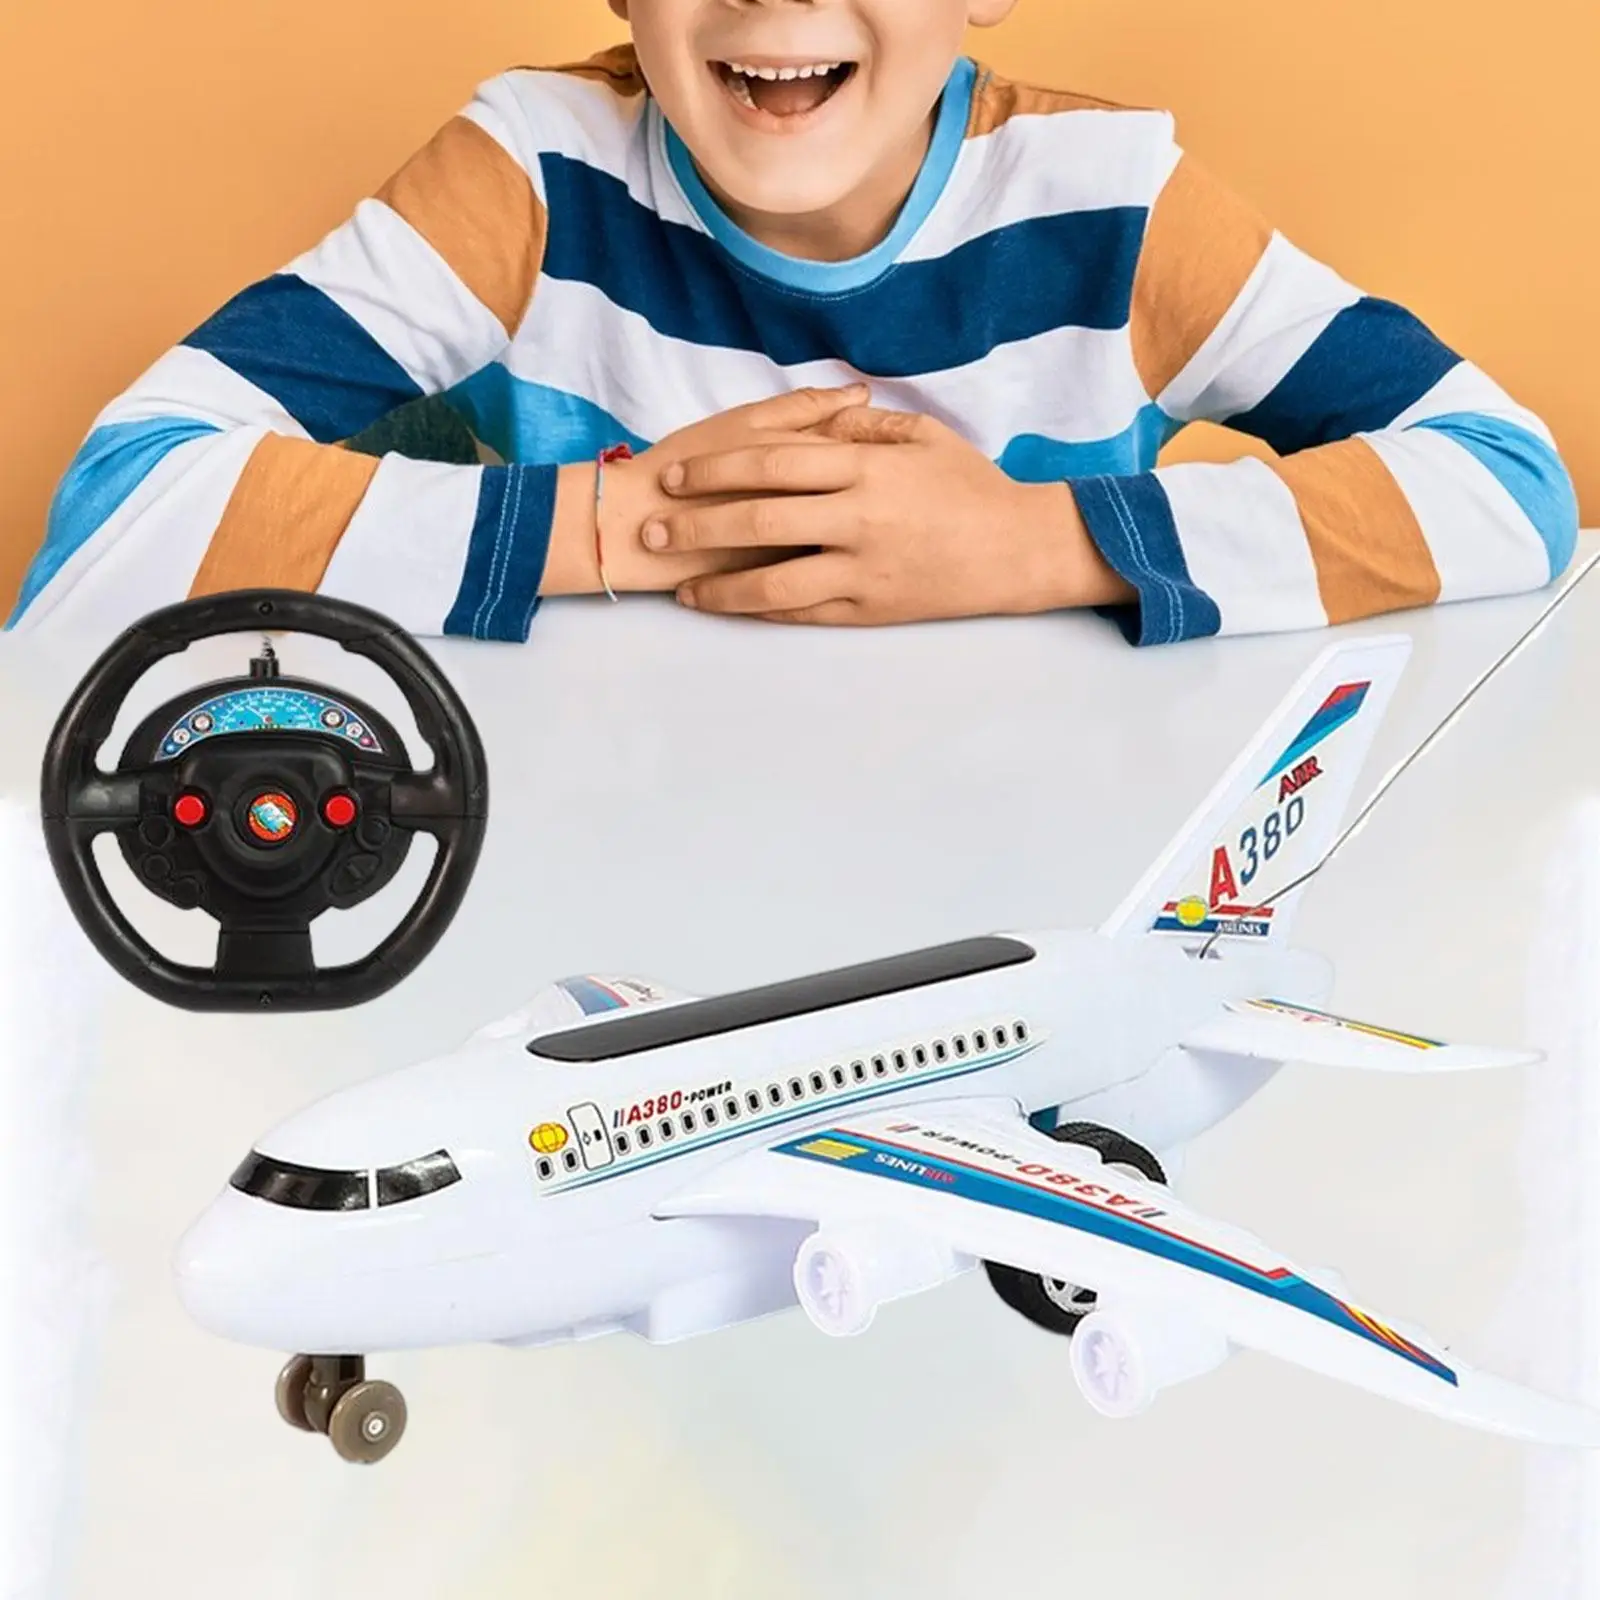 Remote Control Airplane Toy Plane 2CH Easy to Operate Aircraft Forward/Backward